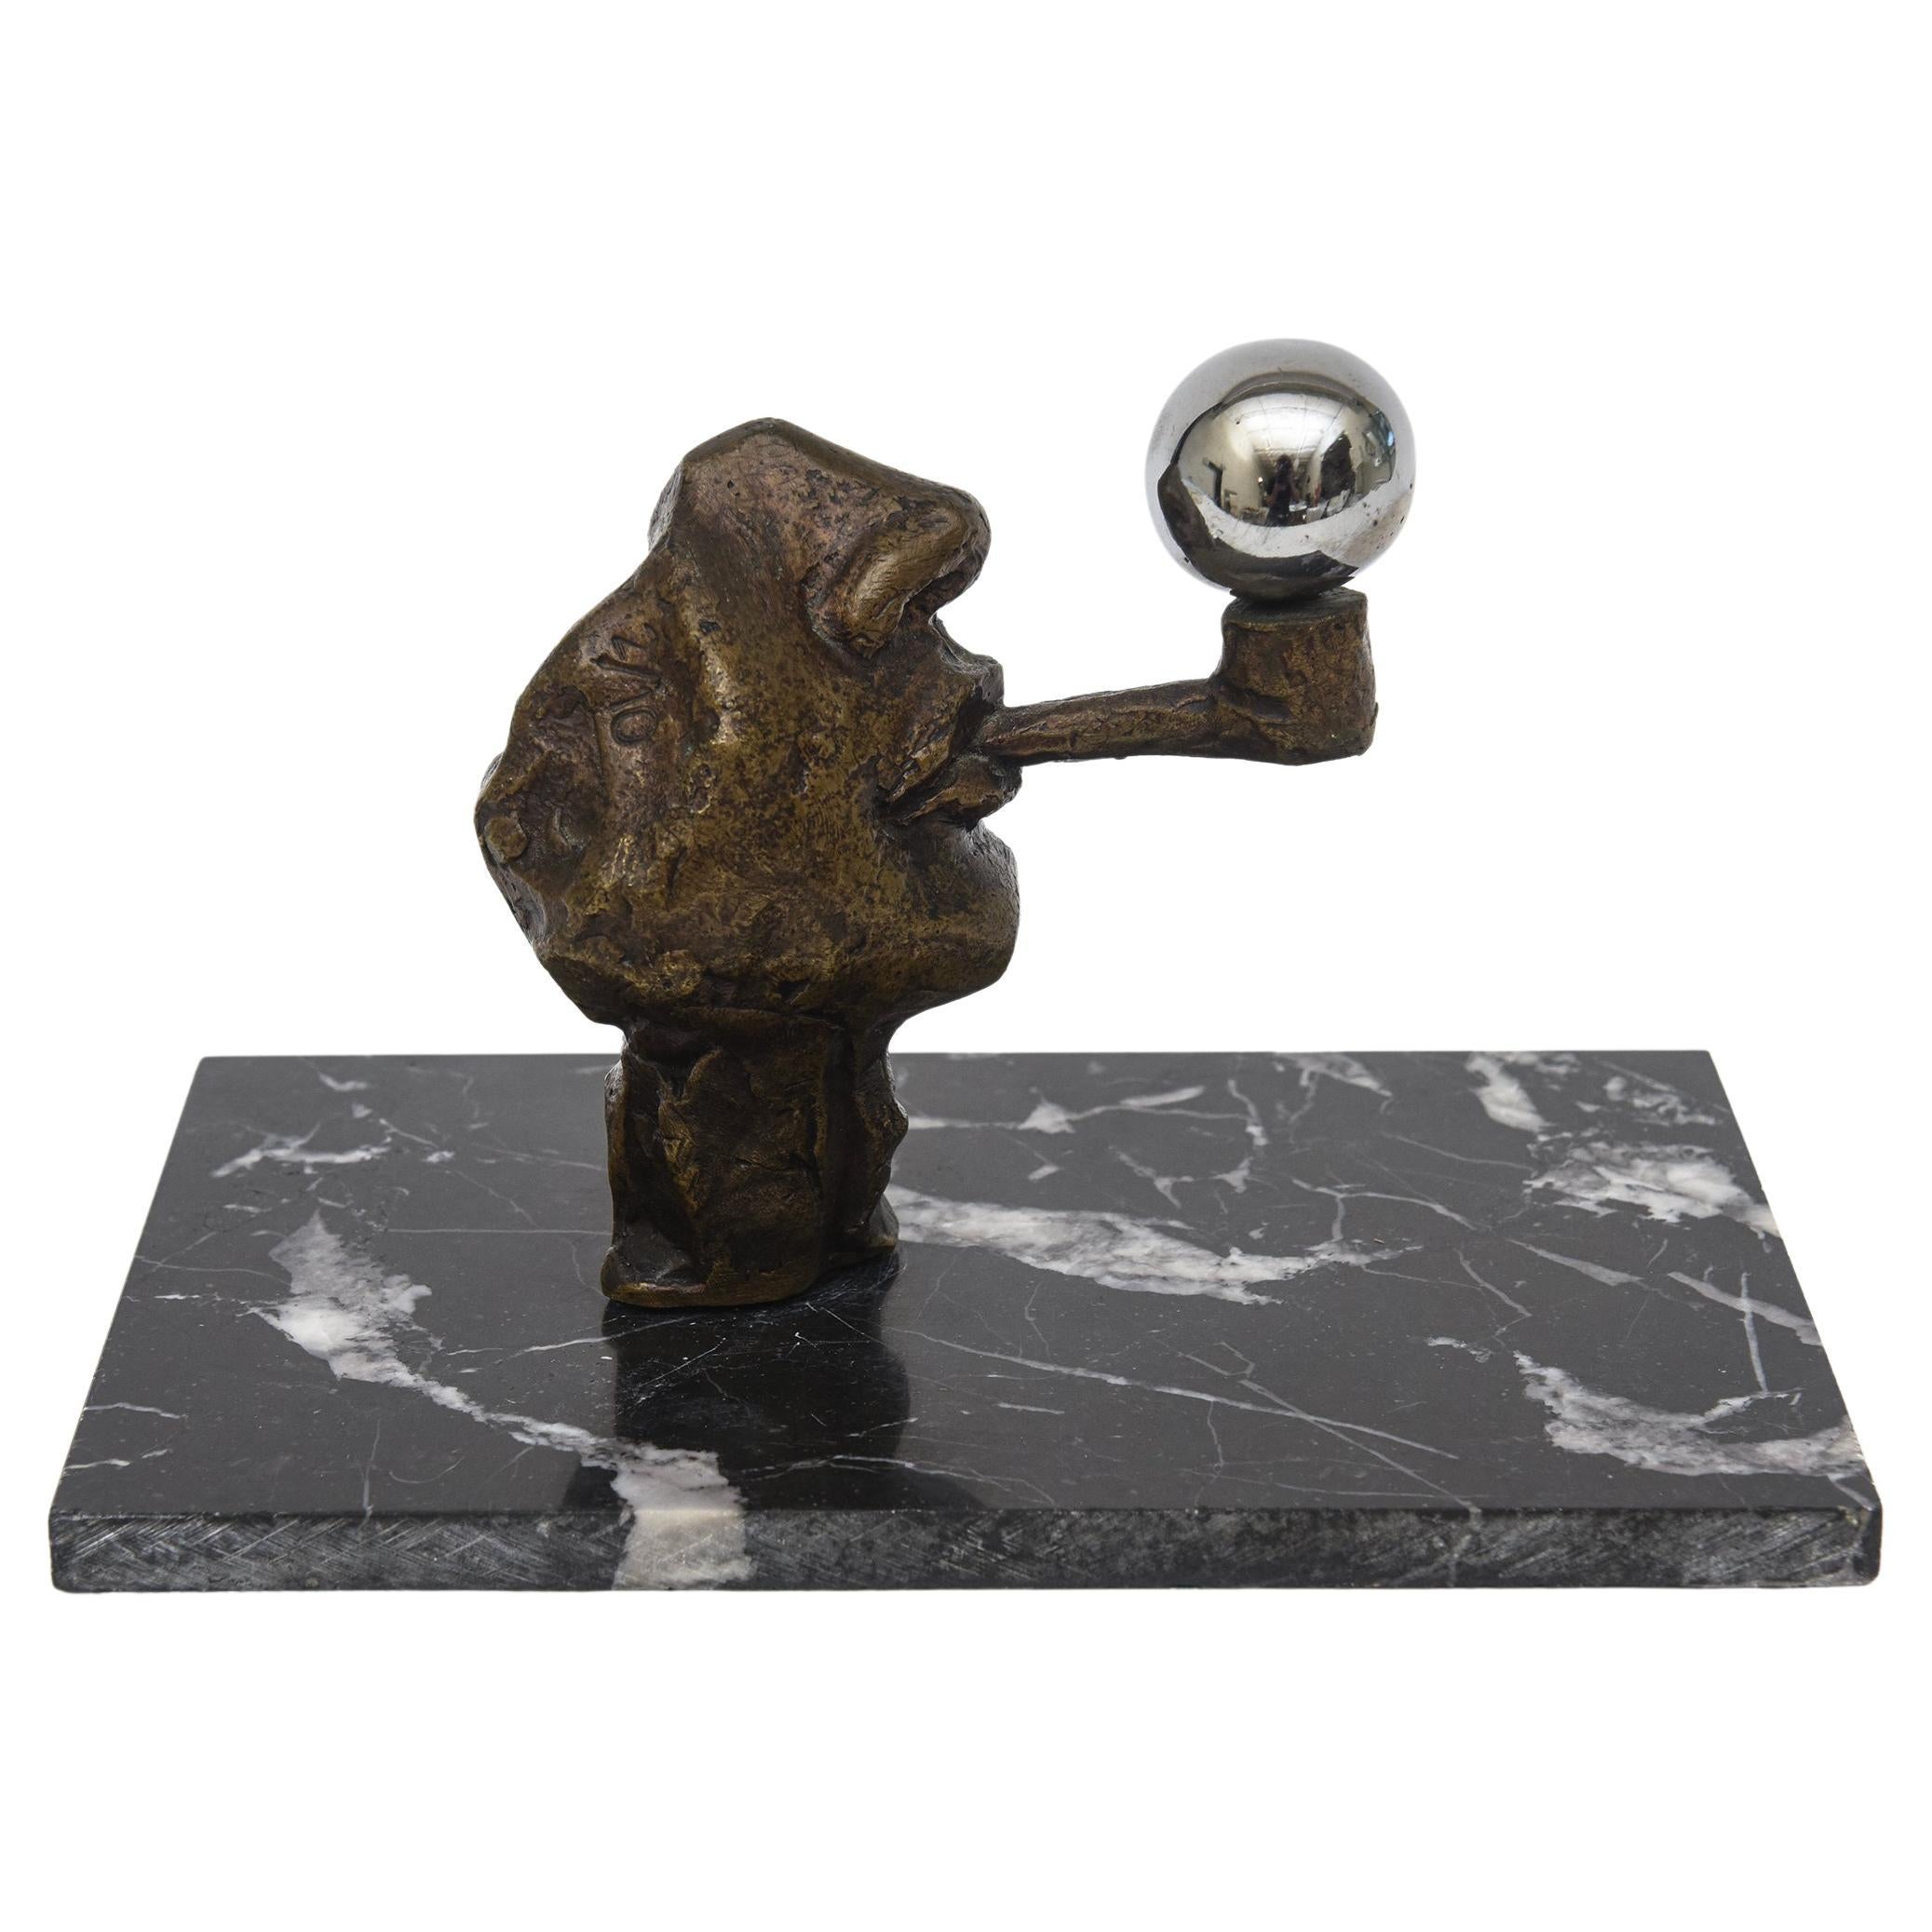  Bronze, Chrome, Marble Vintage Sculpture By Victor Salmones Blowing Bubbles im Angebot